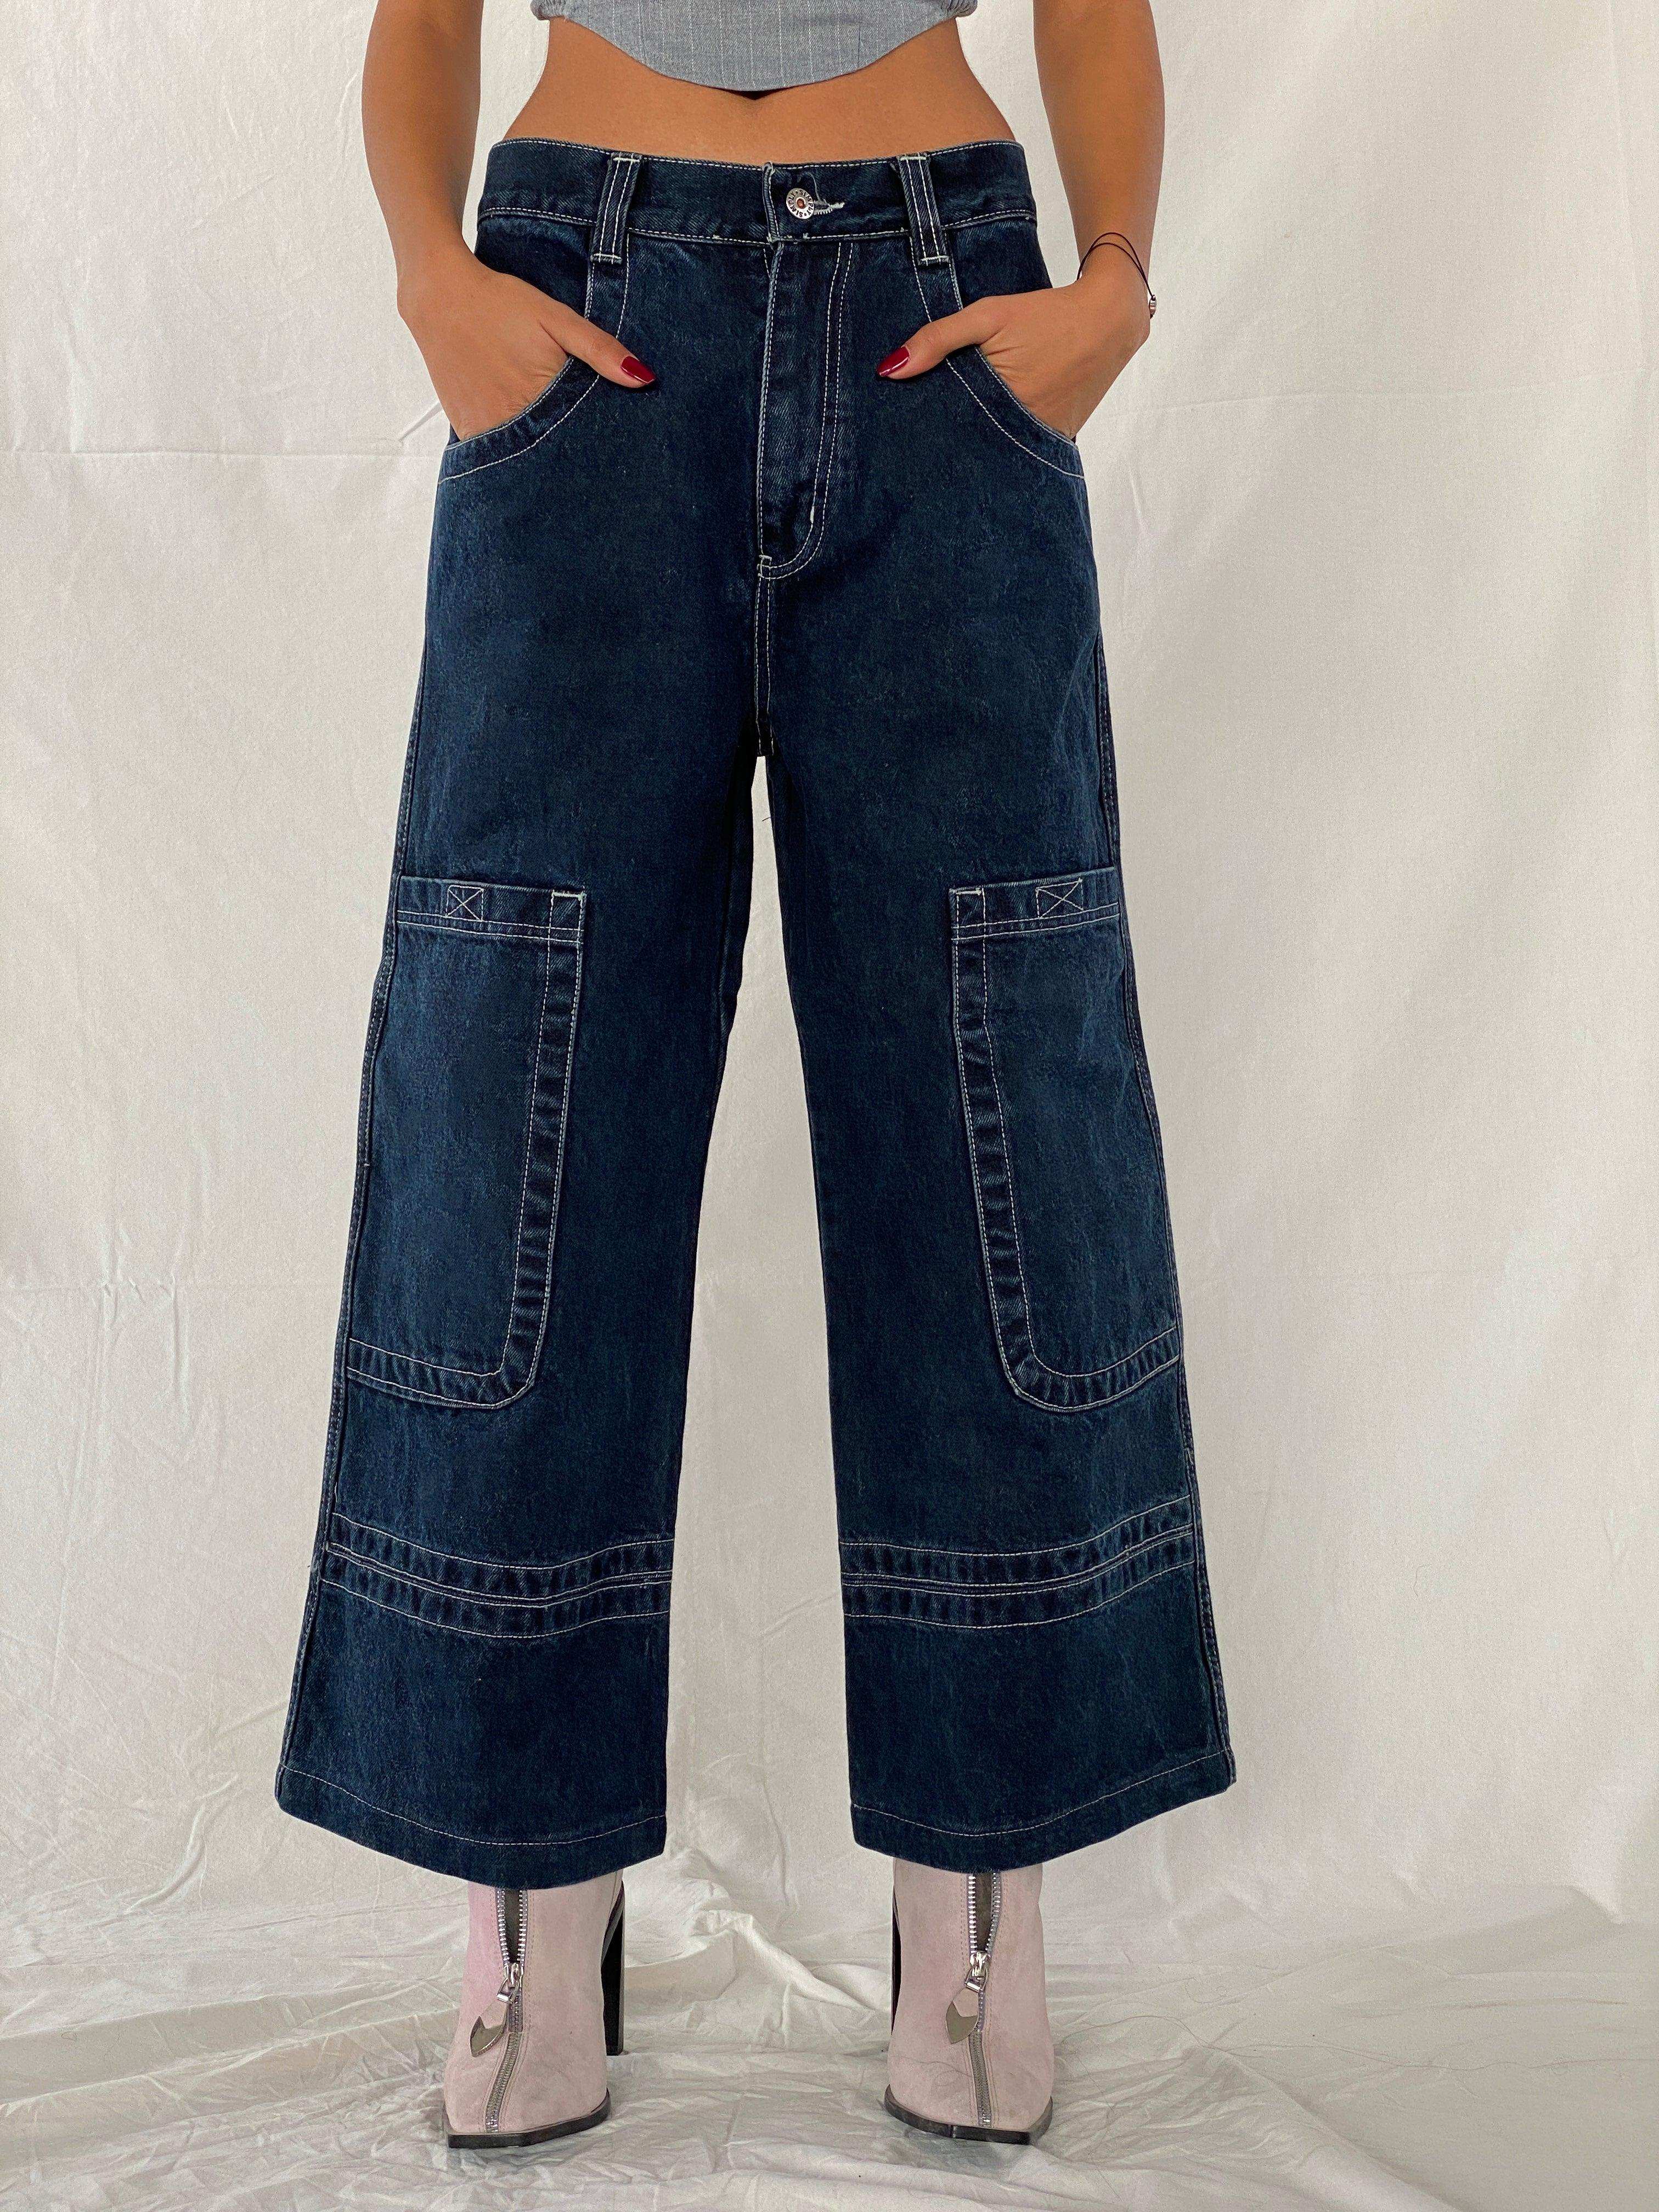 Simply The Best Hip Hop Style Baggy Jeans - Balagan Vintage Jeans 00s, HipHop, hiphop jeans, NEW IN, Tojan